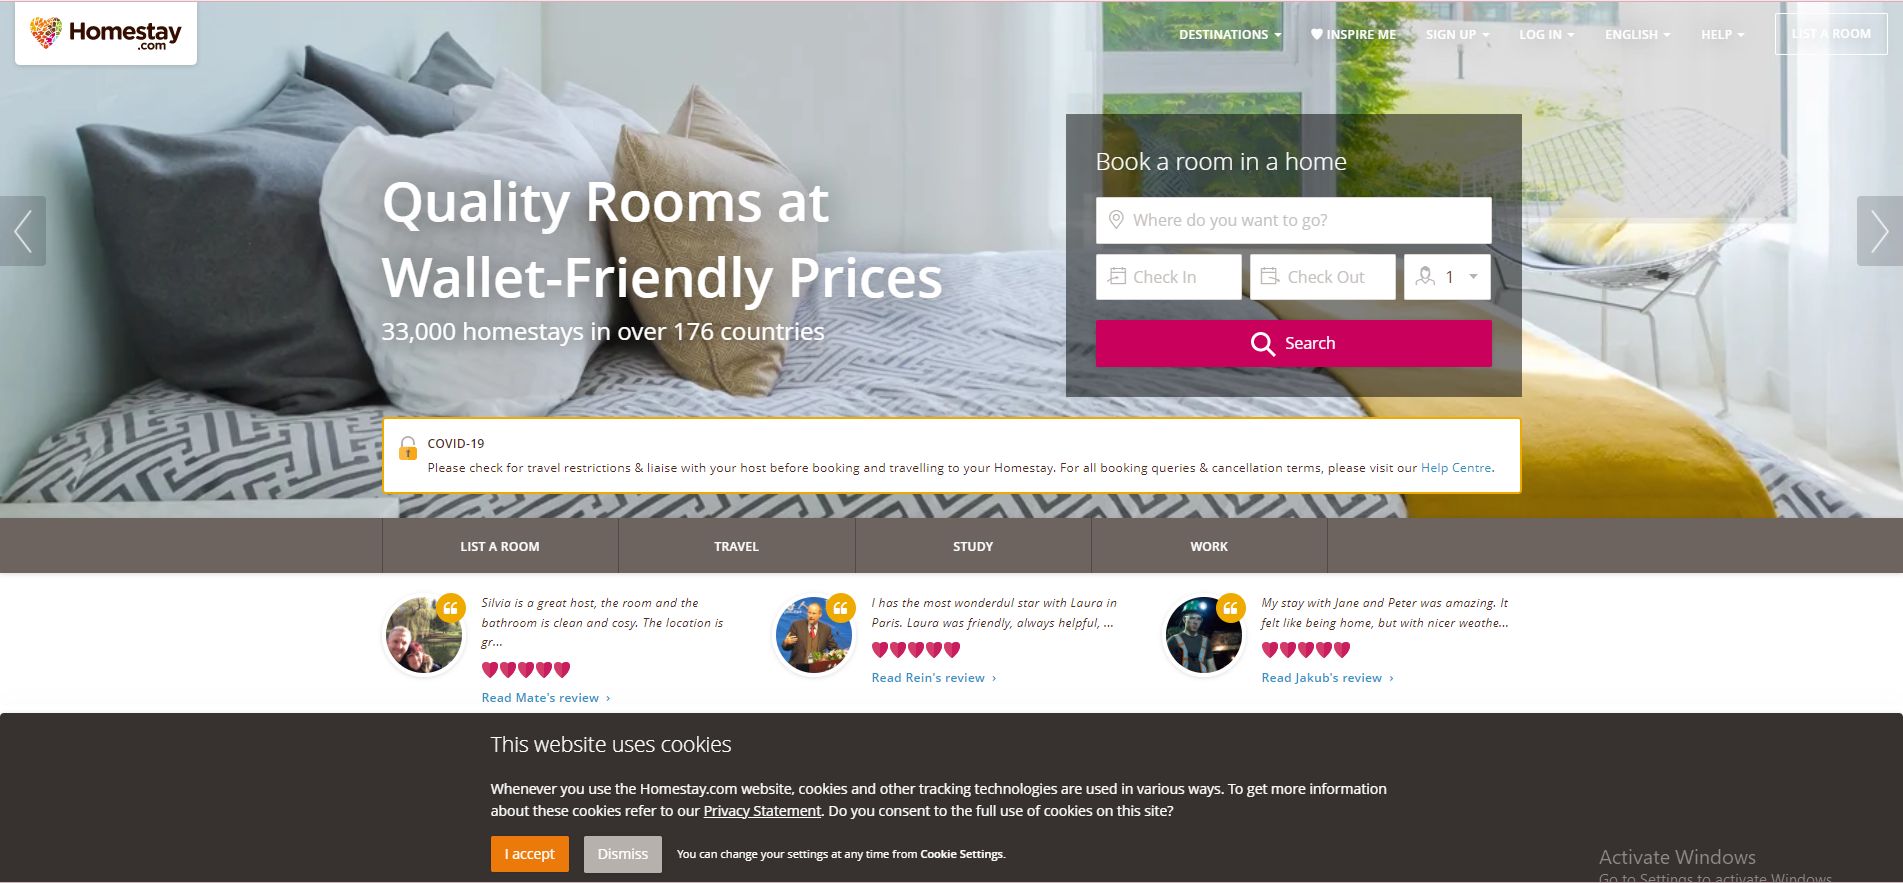 homestay business like airbnb